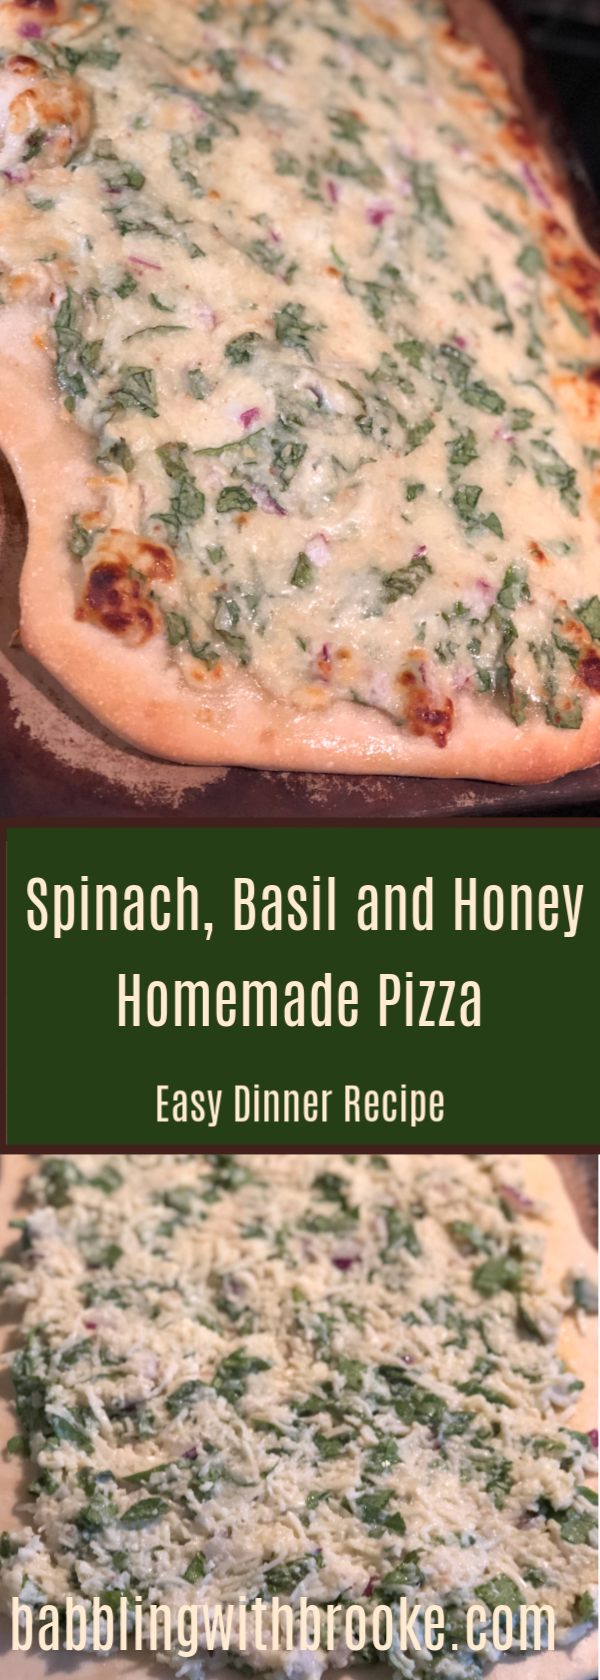 This easy, homemade pizza recipe is so easy! It has the perfect amount of sweetness and is a great variation to your typical pizza. #homemadepizza #easydinnerrecipe #dinnerrecipe #winepairing #sweetpizza